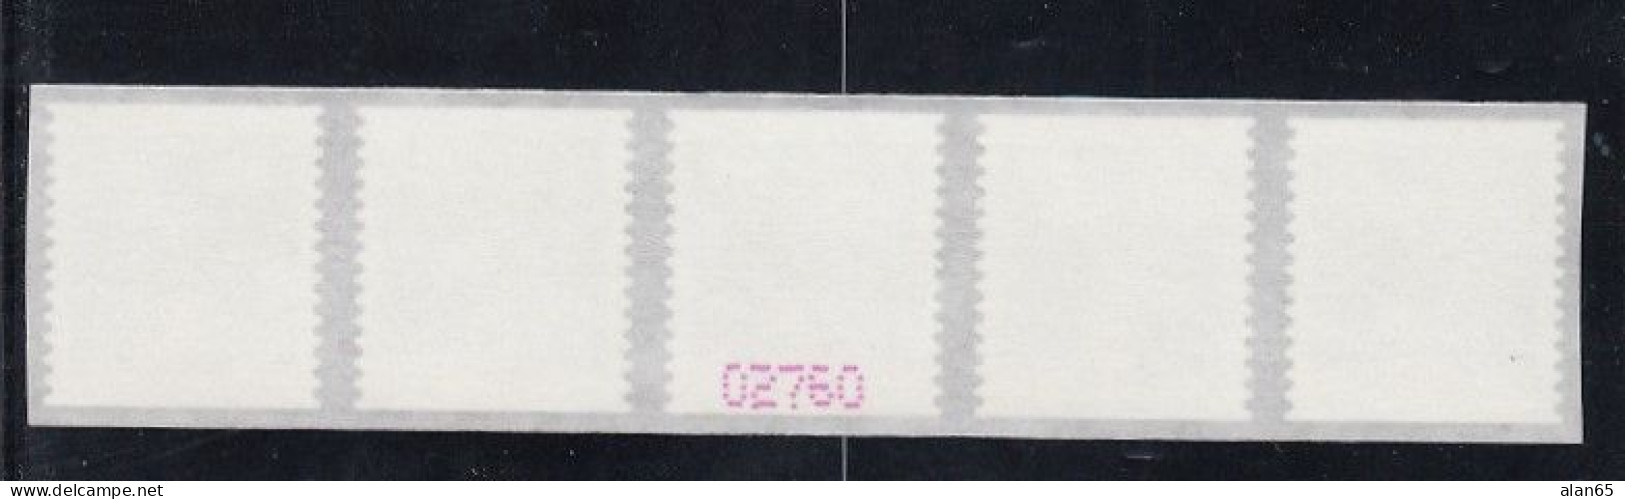 Sc#4496, Patriotic Quill And Inkwell, 2011 Issue, 44-cent Stamp Plate # Strip Of 5 - Numero Di Lastre